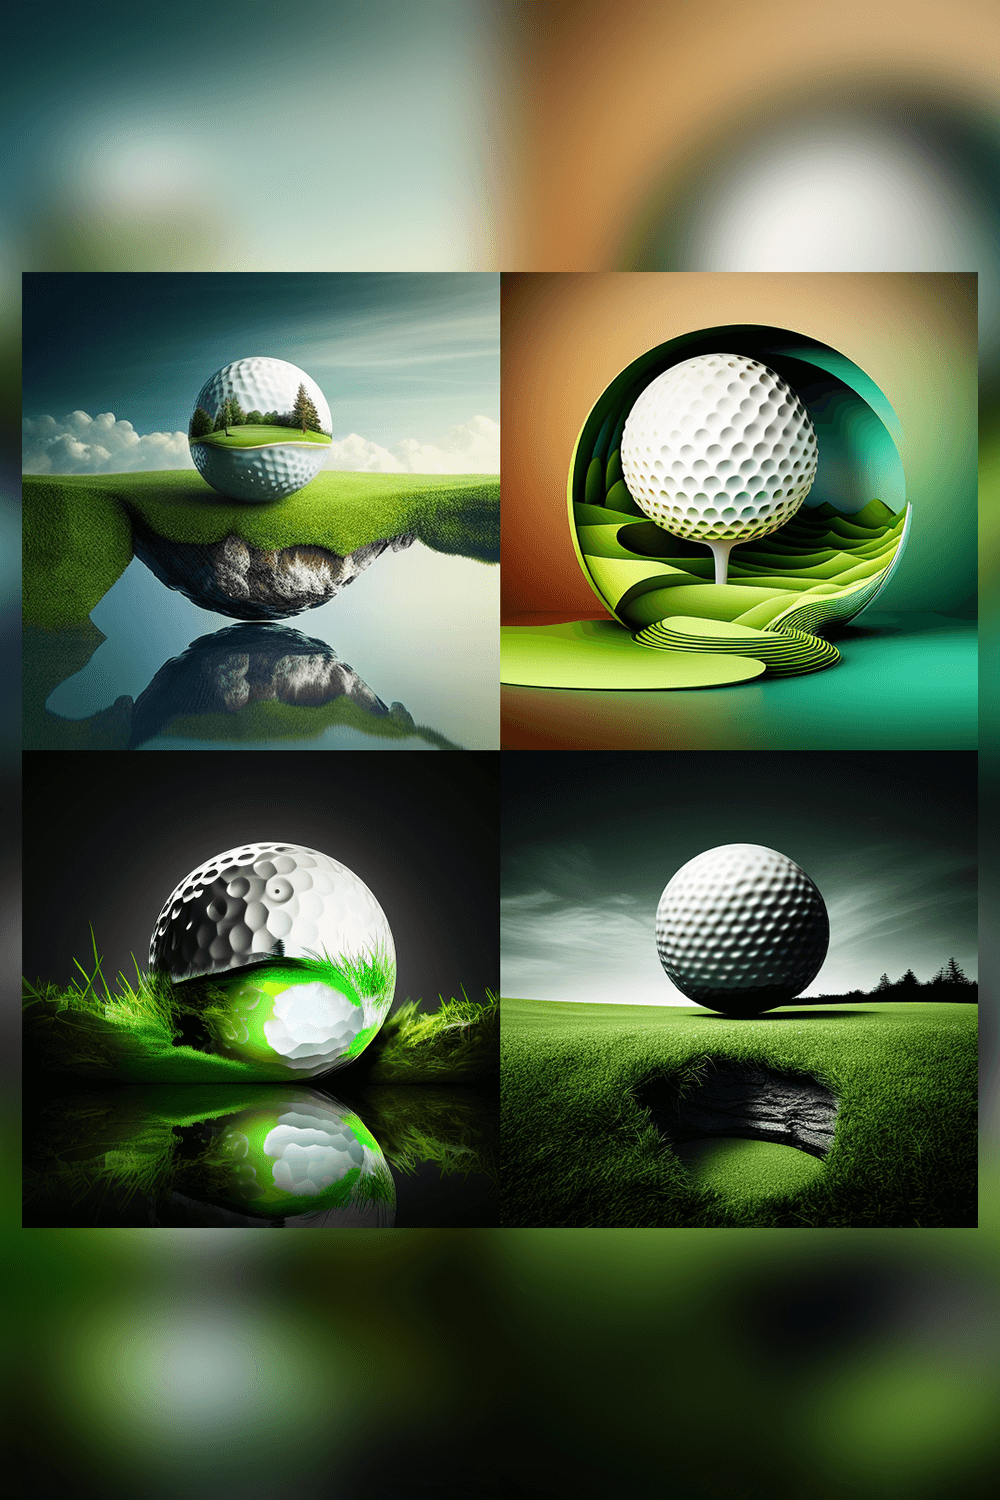 Series of photoshopped images of a golf ball.